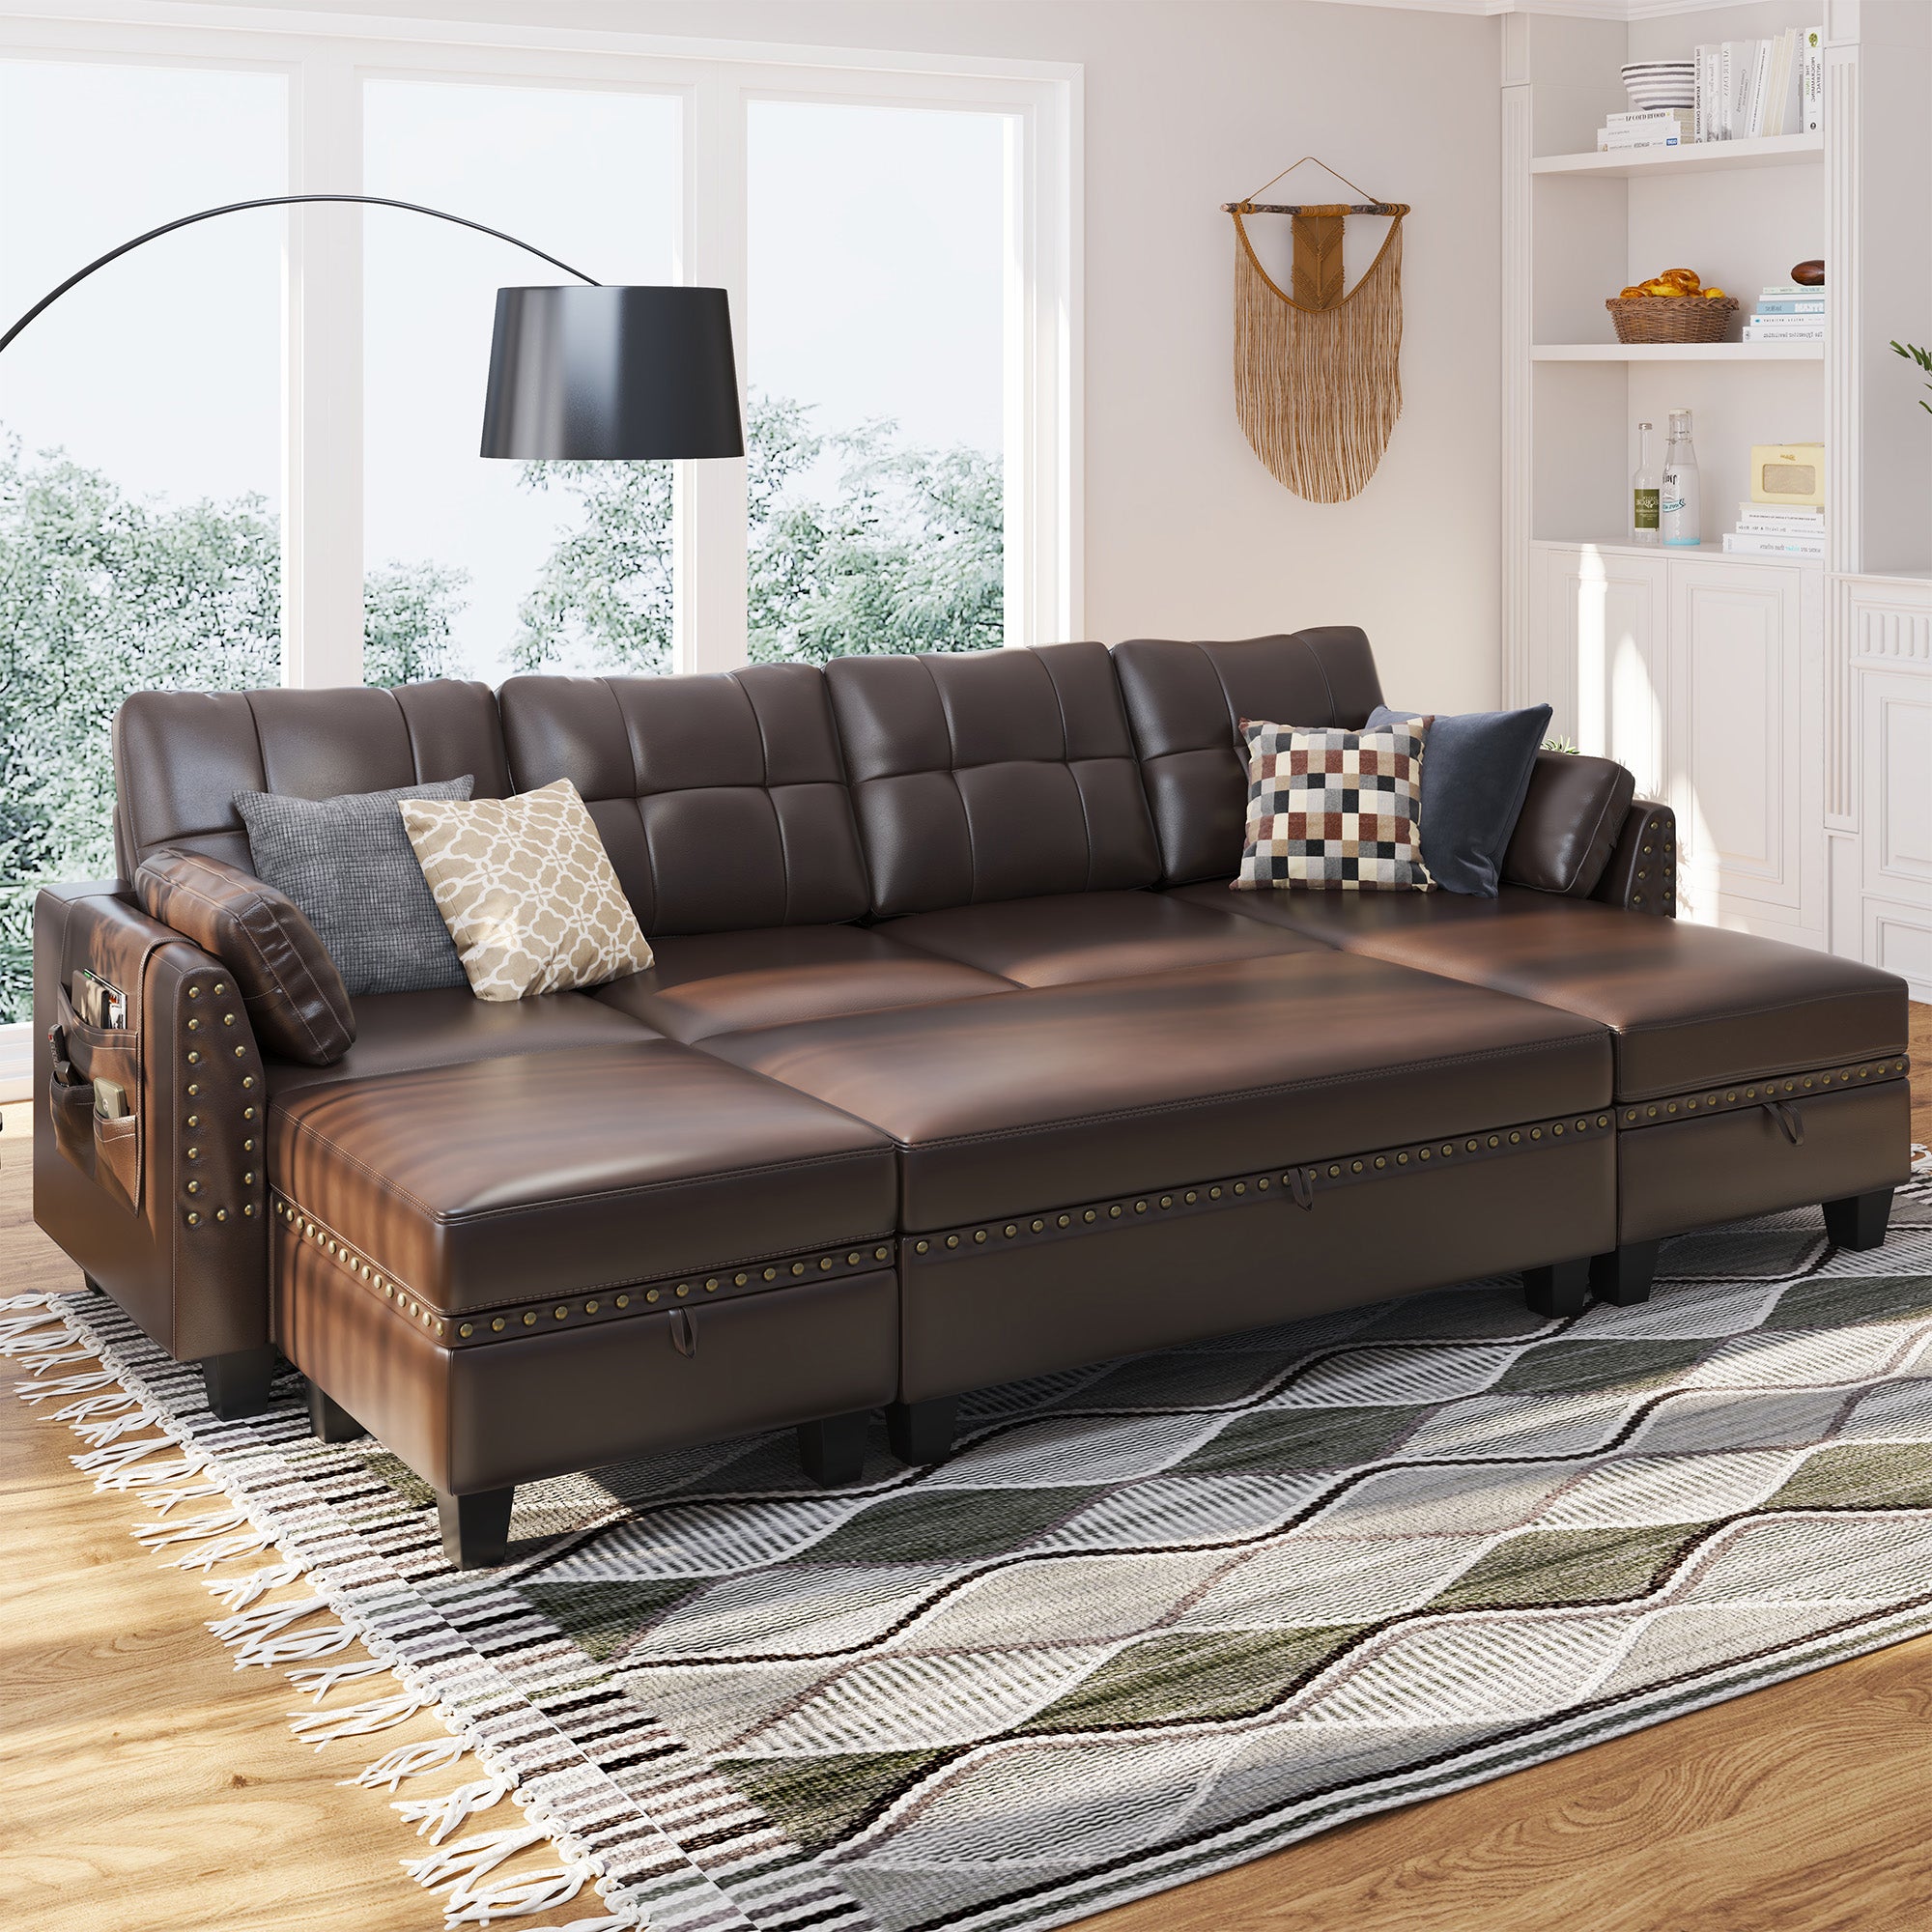 HONBAY 4-Seat Sectional Sofa Sleeper with Storage